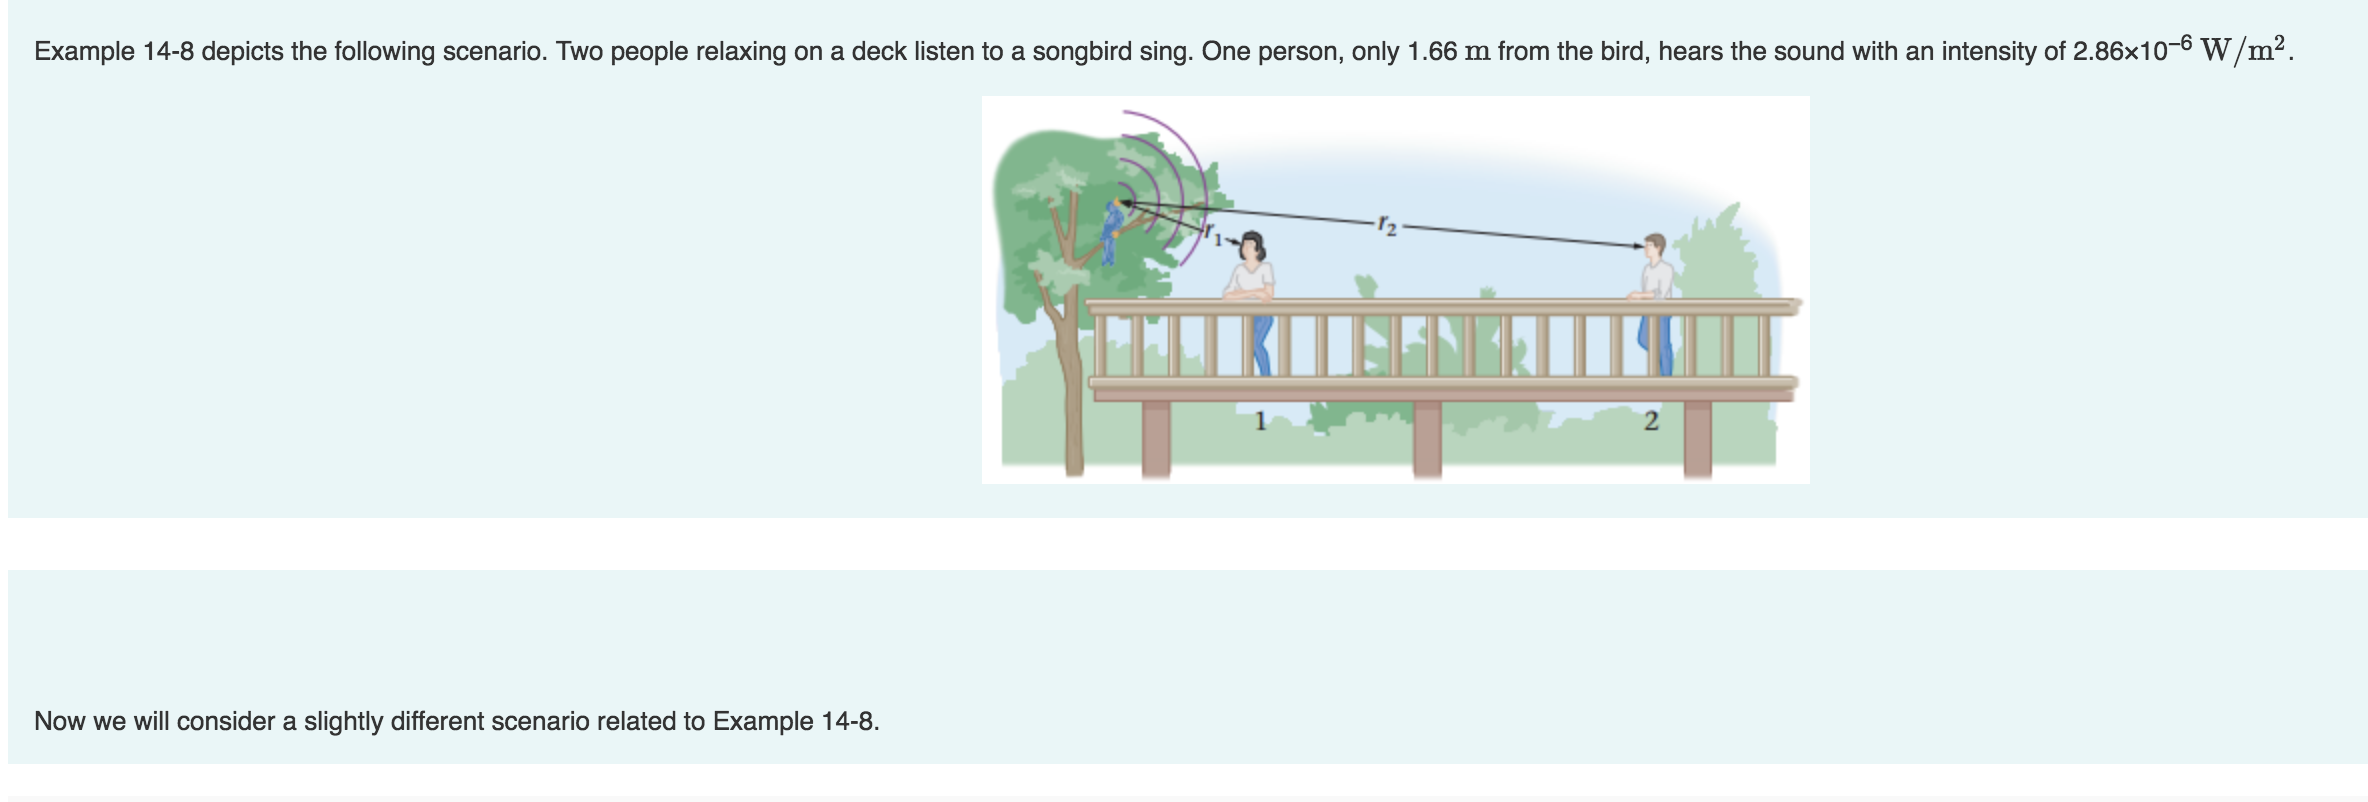 Example 14-8 depicts the following scenario. Two people relaxing on a deck listen to a songbird sing. One person, only 1.66 m from the bird, hears the sound with an intensity of 2.86x10-6 W/m2.
2
าร
2
Now we will consider a slightly different scenario related to Example 14-8
